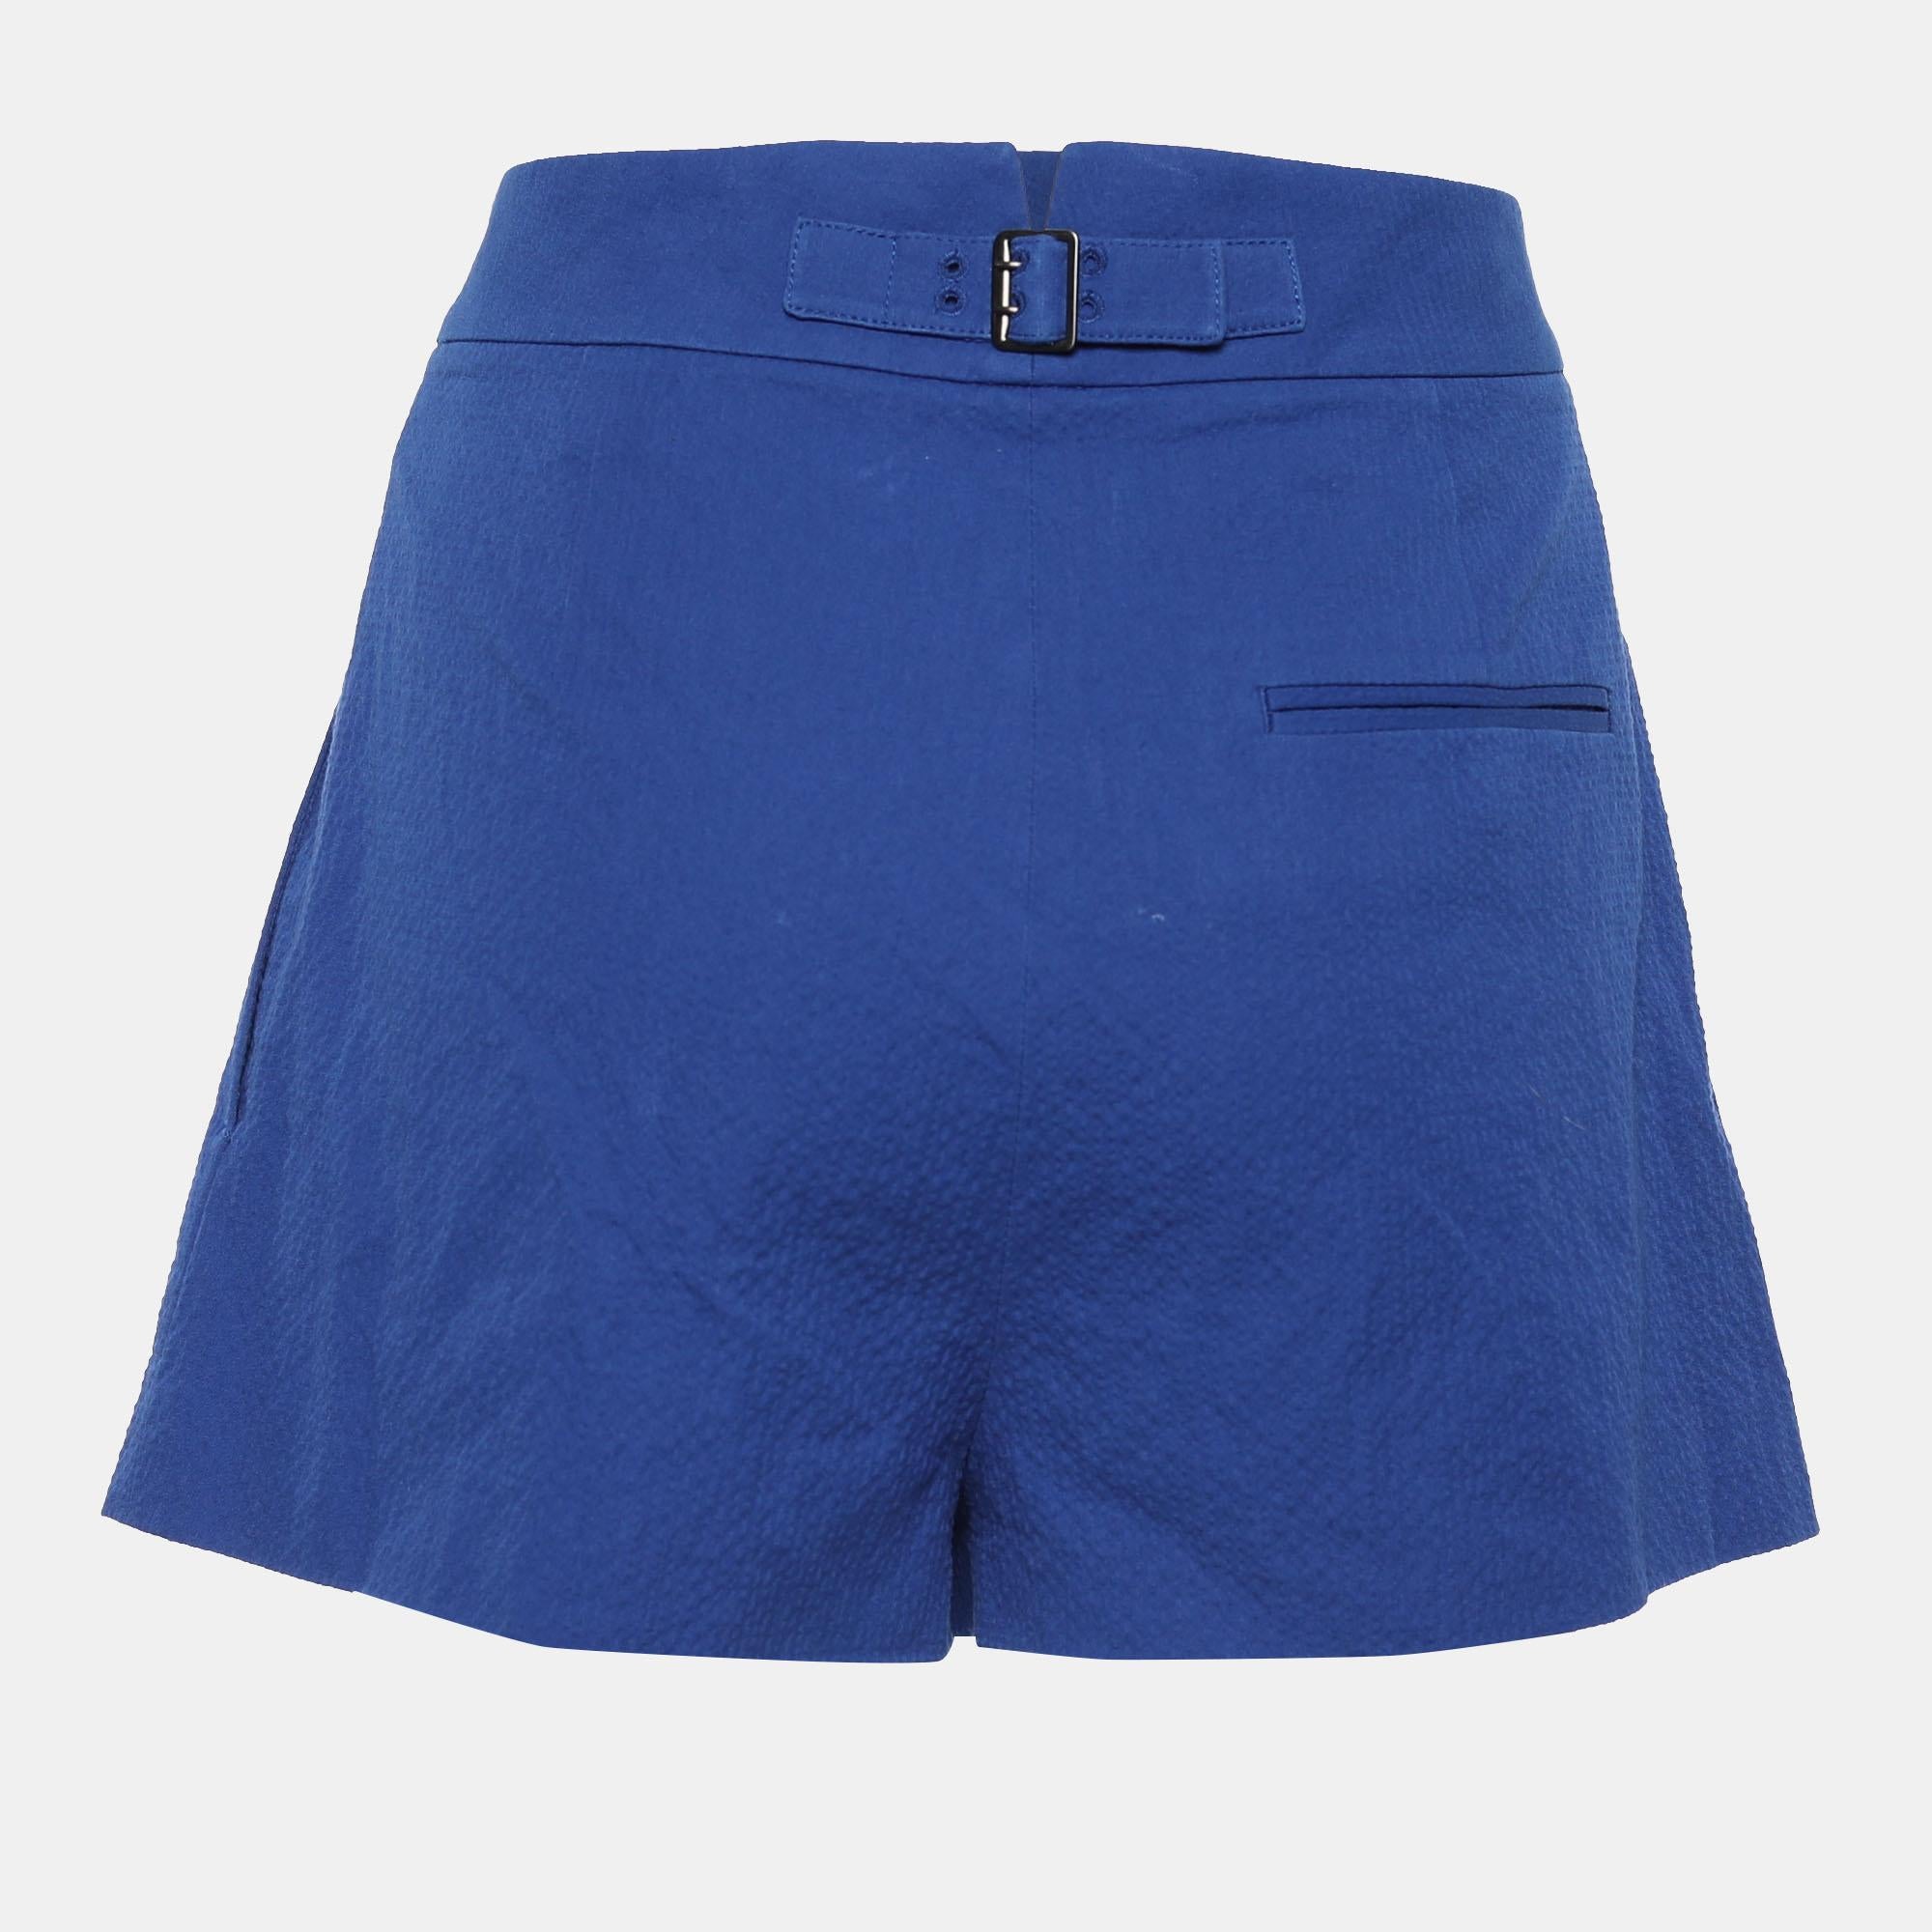 These comfy shorts from Hermes are all you need to add to your summer wardrobe! They are stitched using blue cotton and flaunt a pleated design, buttoned closure, and pockets. Wear them with a basic tank top and sneakers for that casual-chic look.

